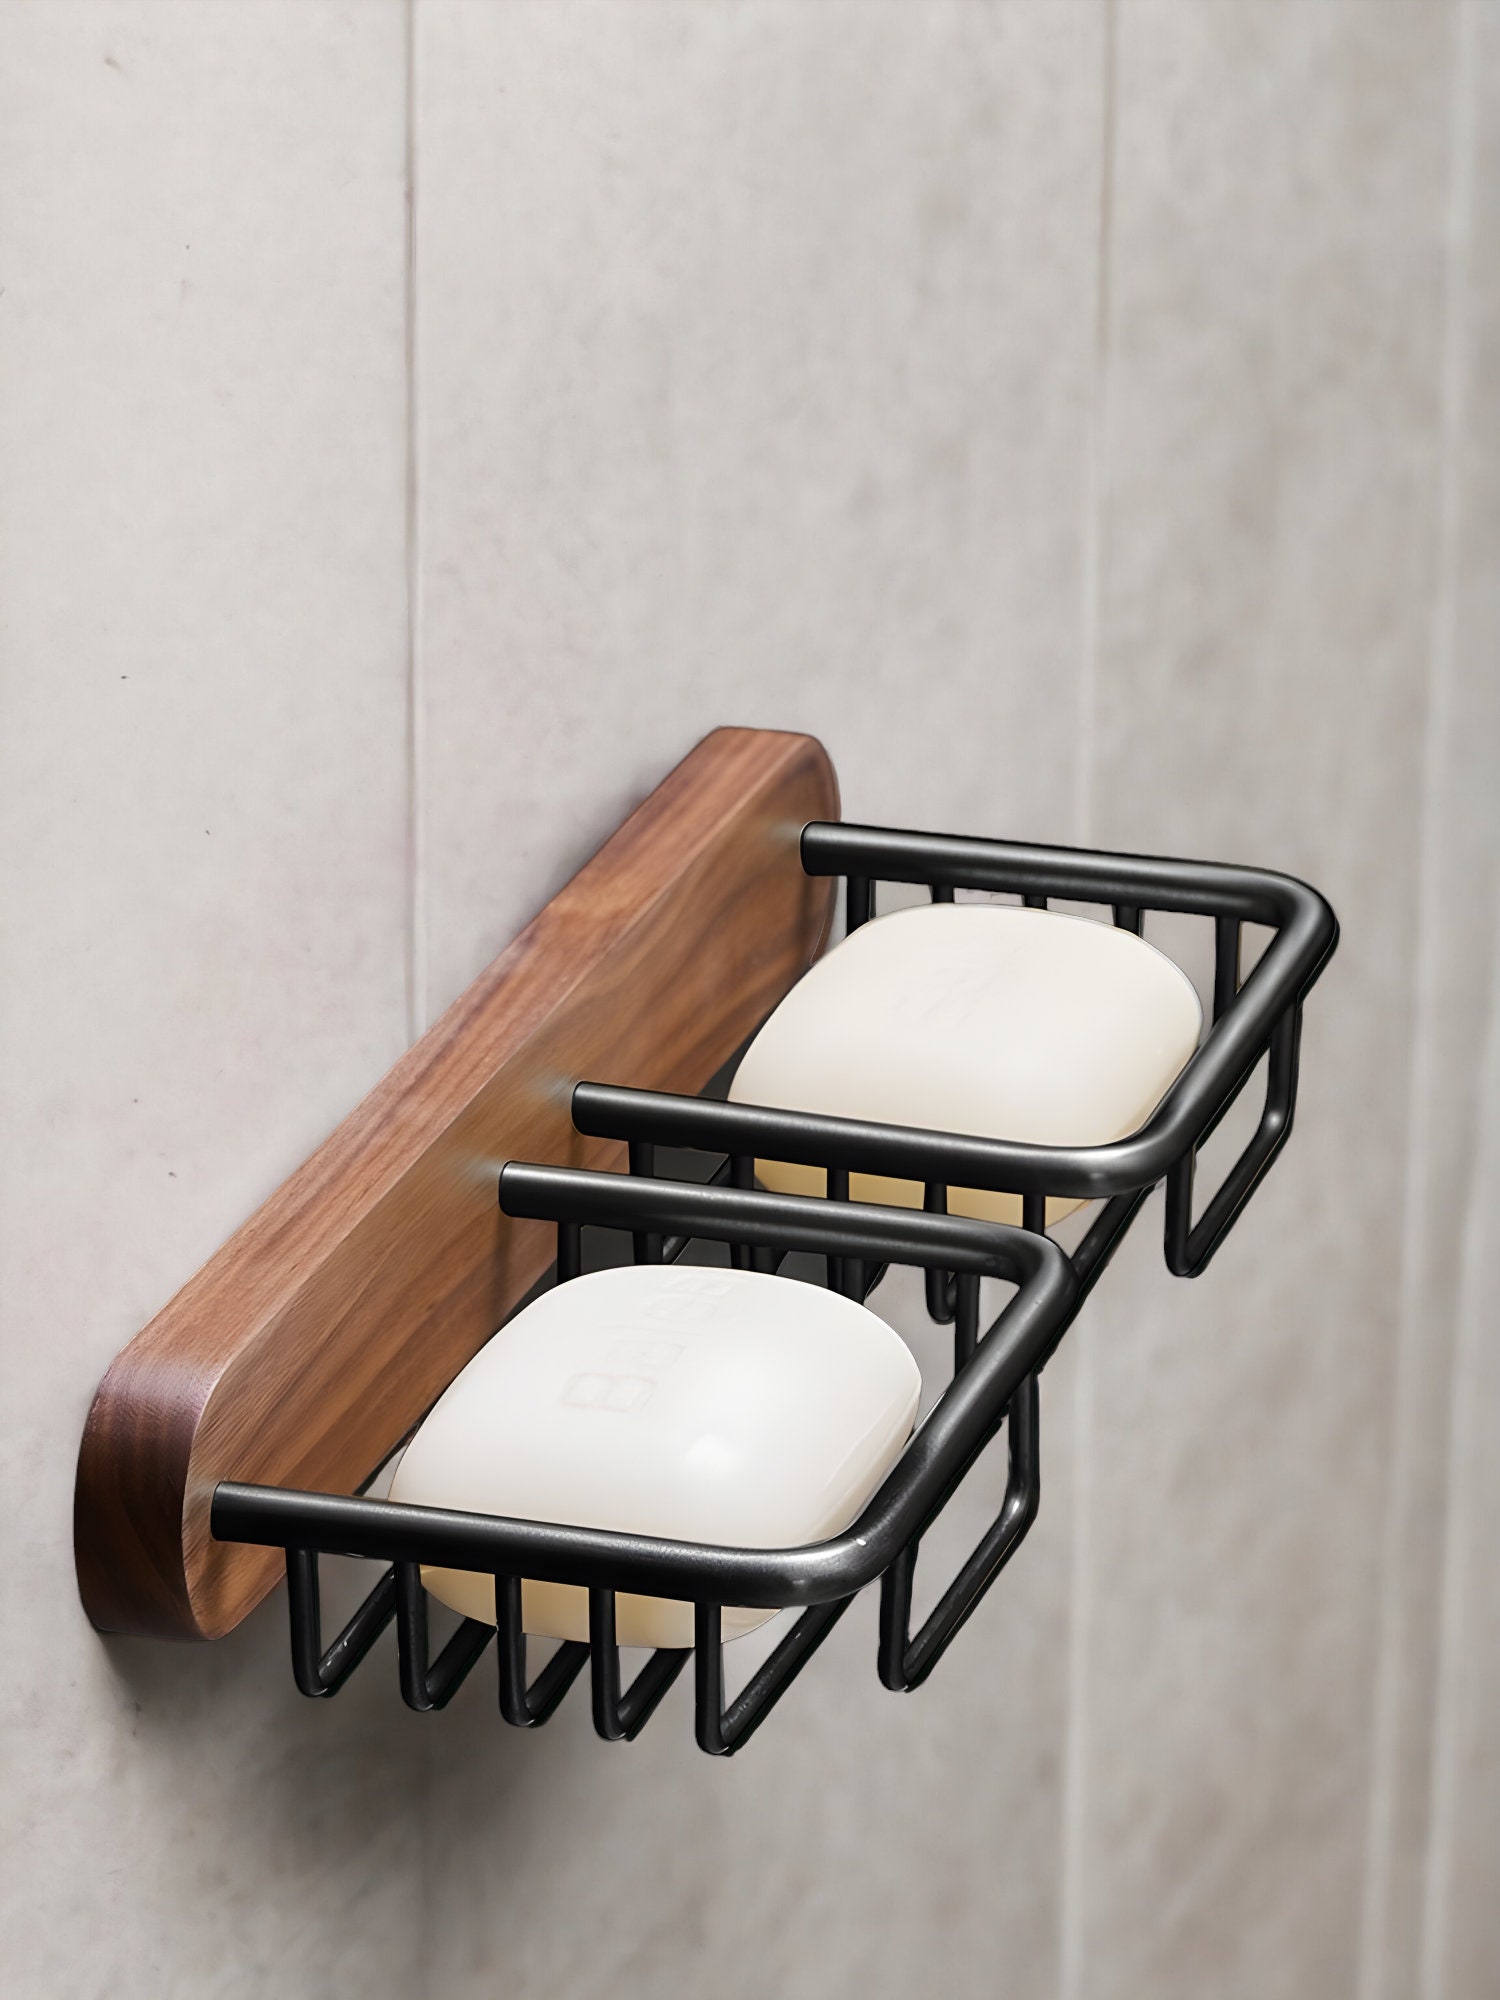 1/2 PCS Magnetic Soap Holder, Wall Mount Soap Dish, Self-Adhesive Hanging  Soap Dish for Shower